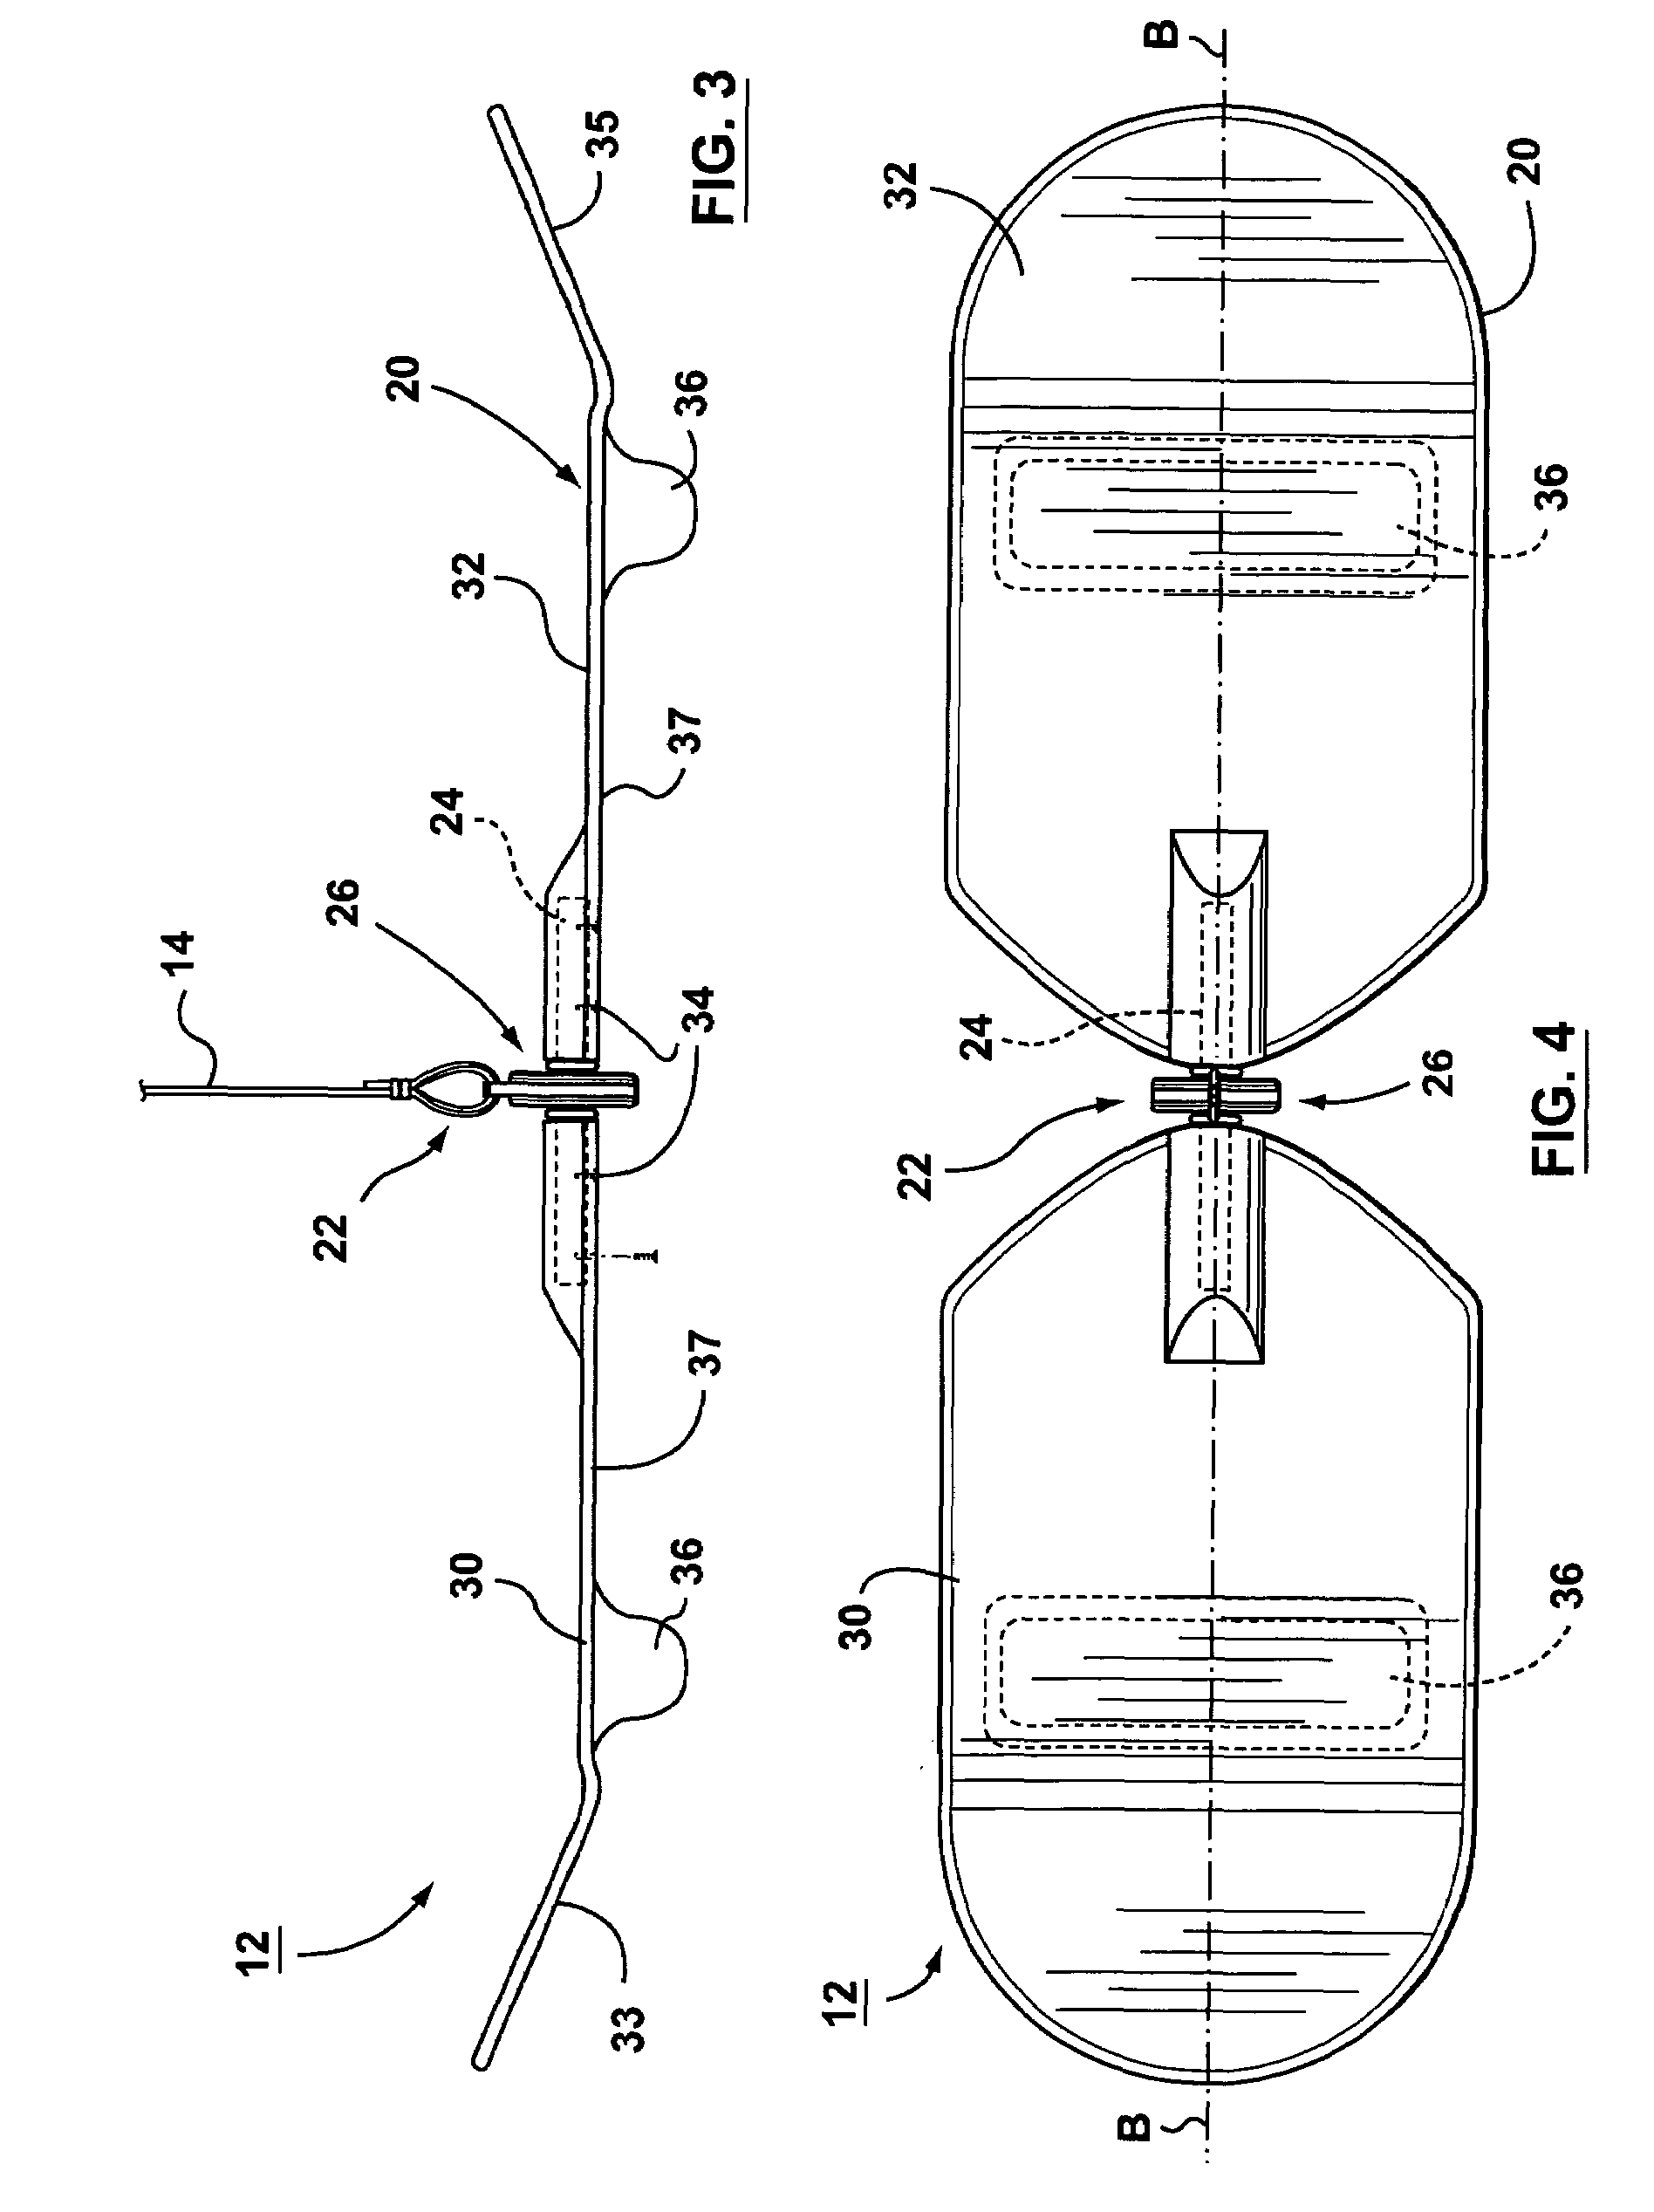 Apparatus for ropeboarding